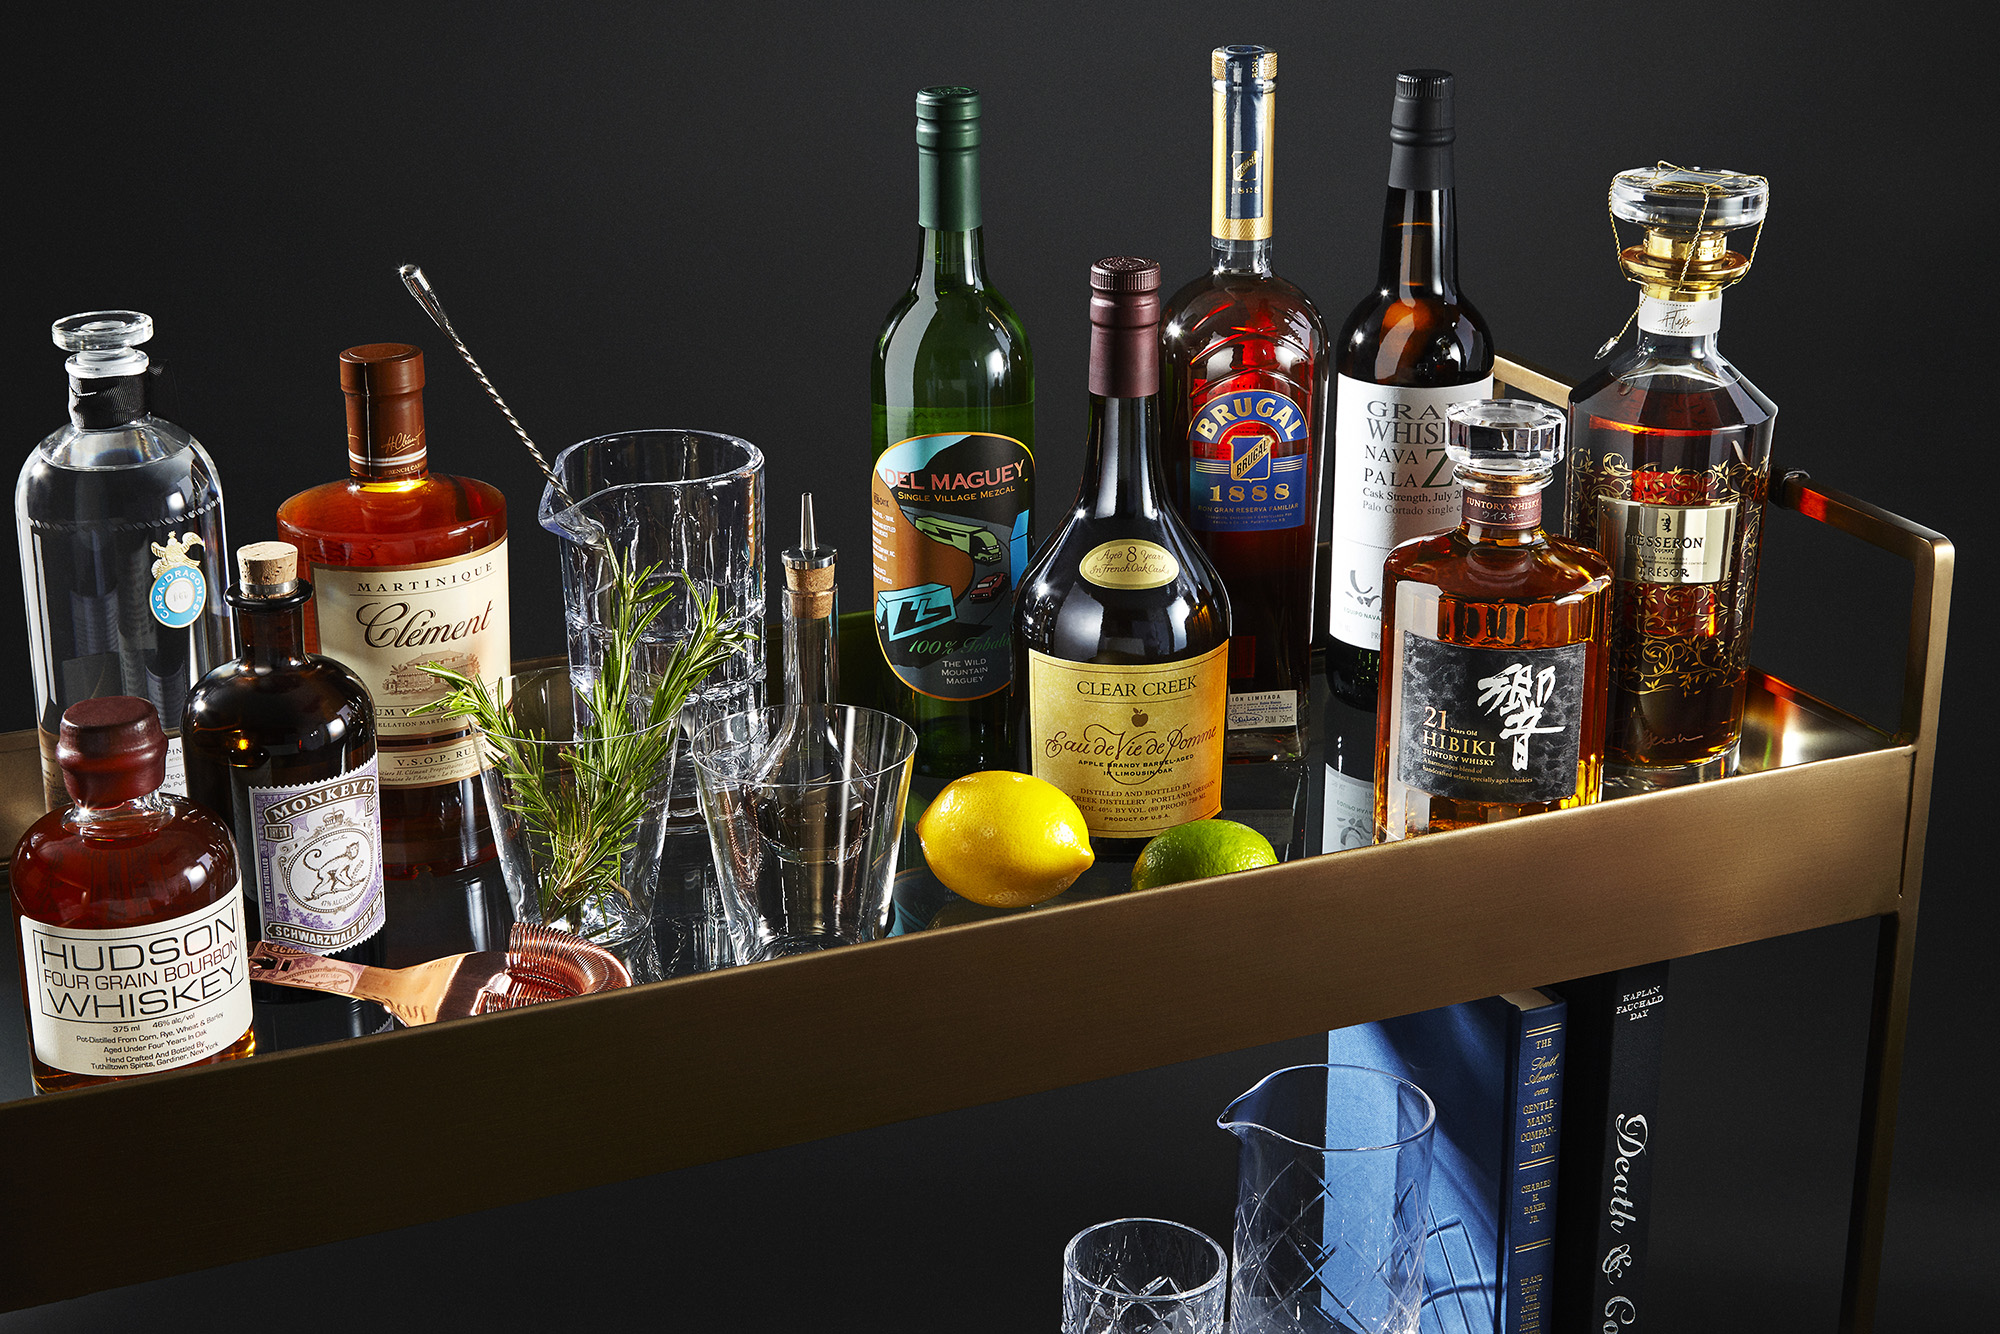  Holiday Spirits: Build the Perfect Home Bar for 2015   Commissioned Photographer / Produced /&nbsp;Photo Edited    BLOOMBERG.COM  | DECEMBER 2014 